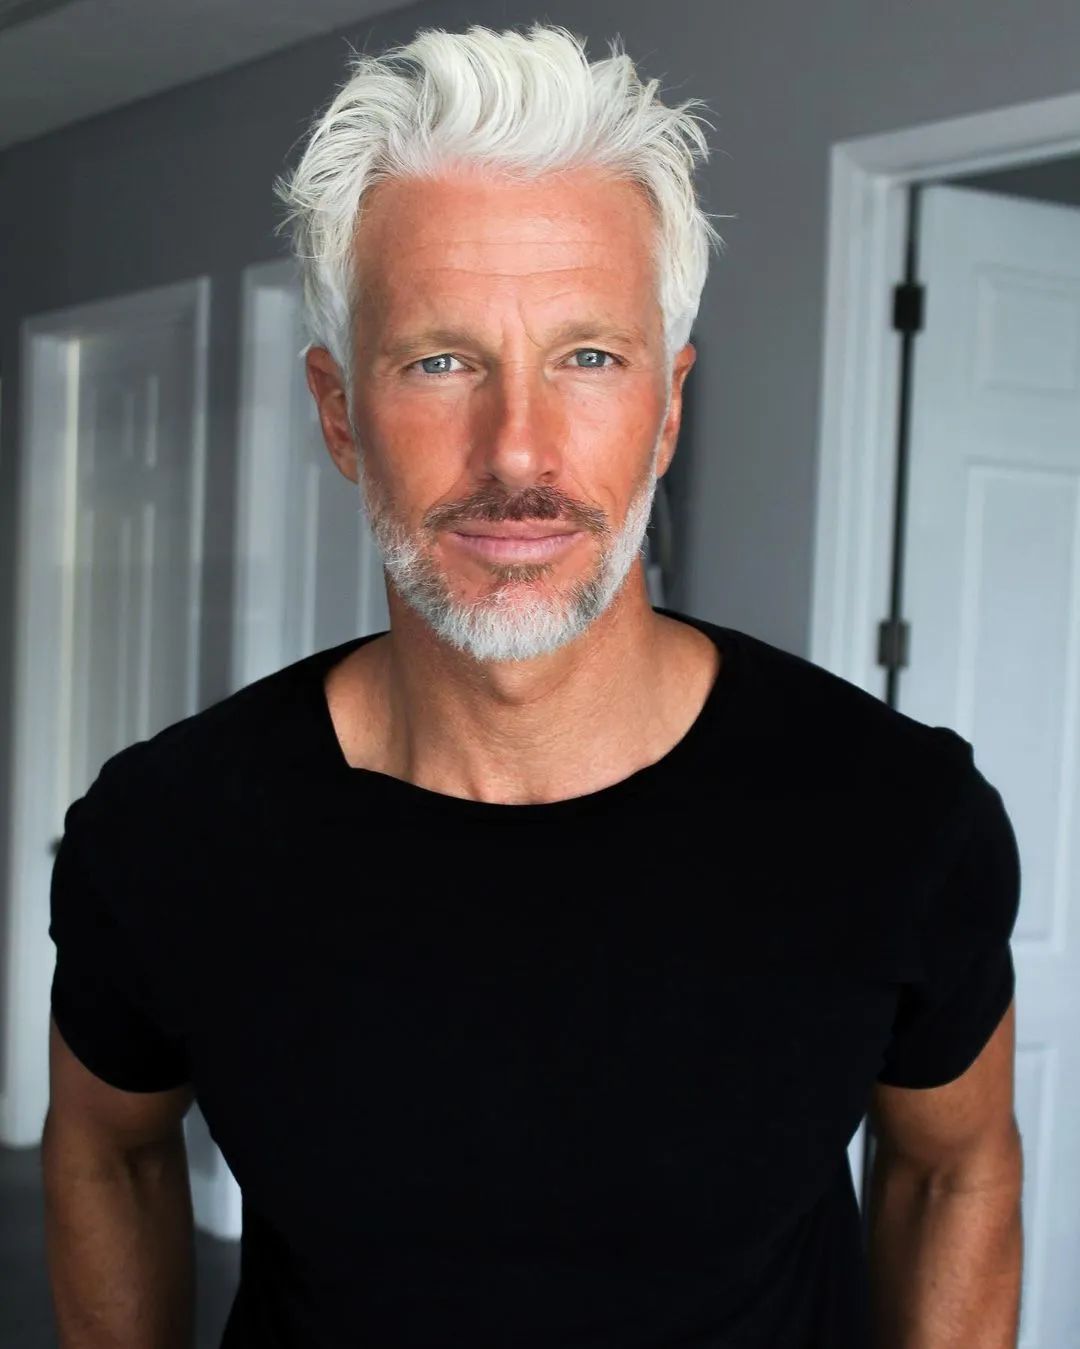 The 44 Year Old American Male Model Became Popular On The Internet And The Silver Haired Old